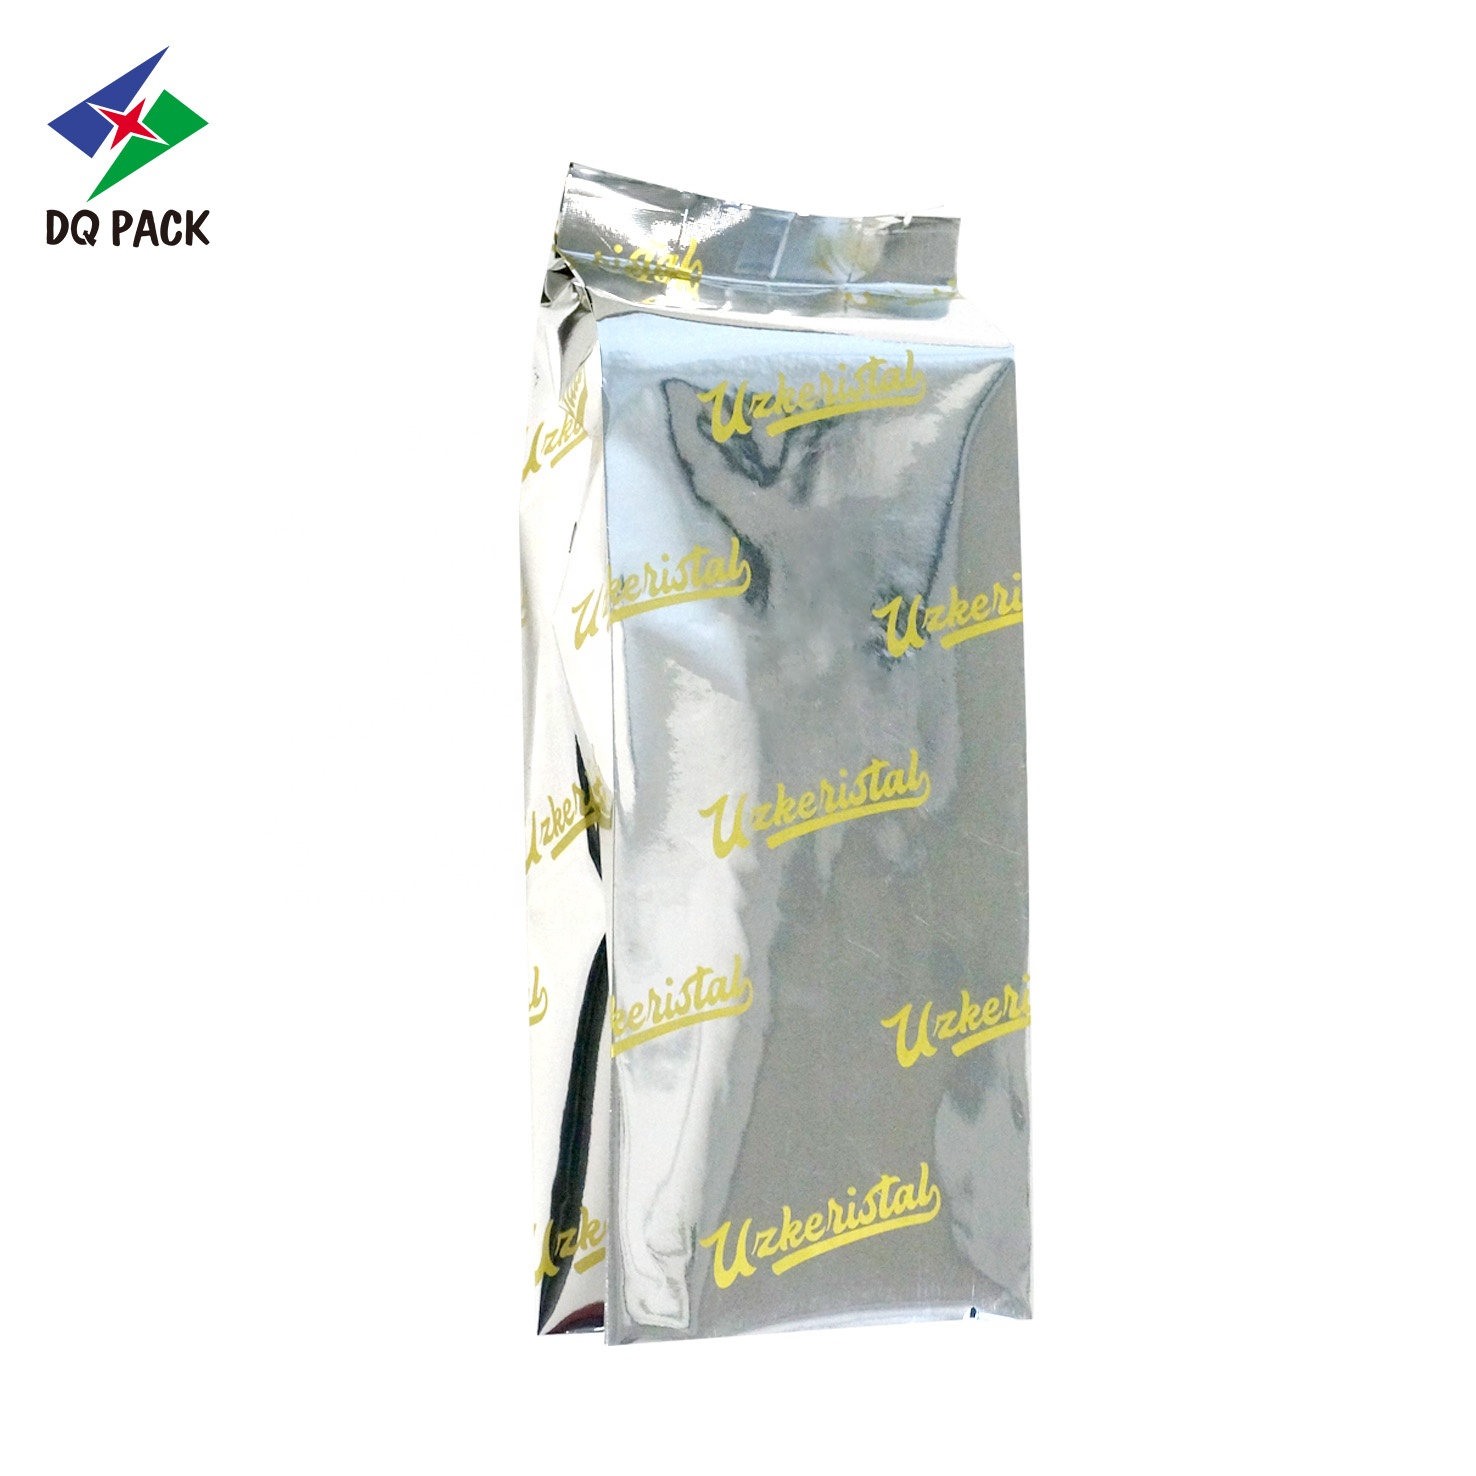 DQ PACK Food Grade Plastic Bags Aluminum Foil Coffee Bag Packaging Side Gusset Pouch